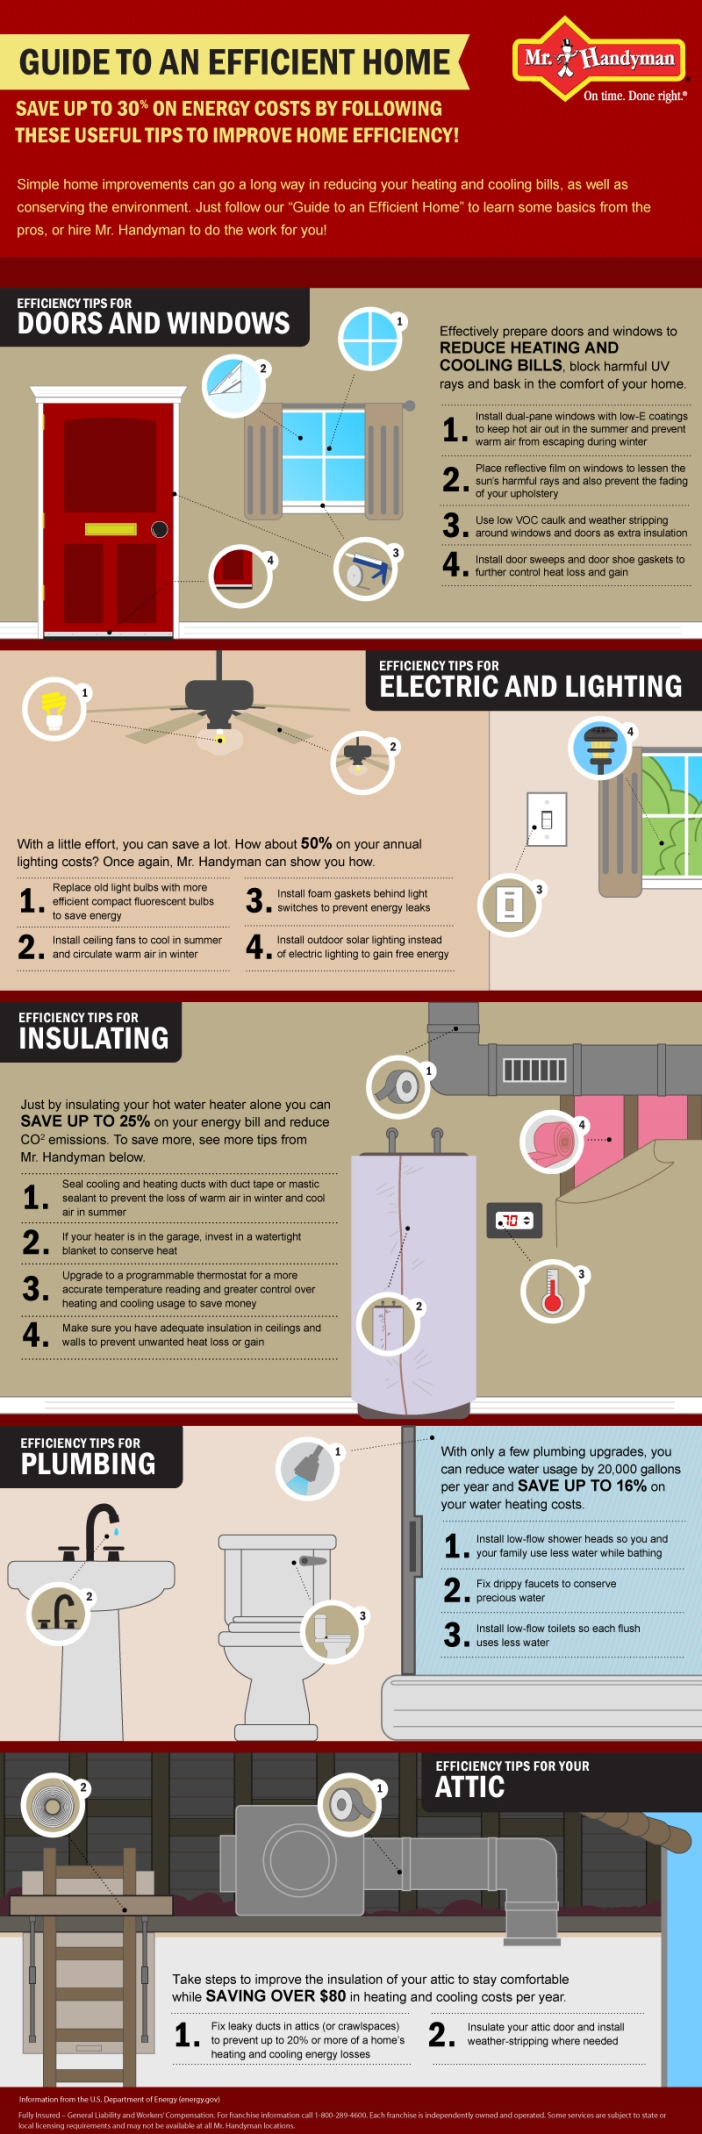 Guide to an efficient home infographic.